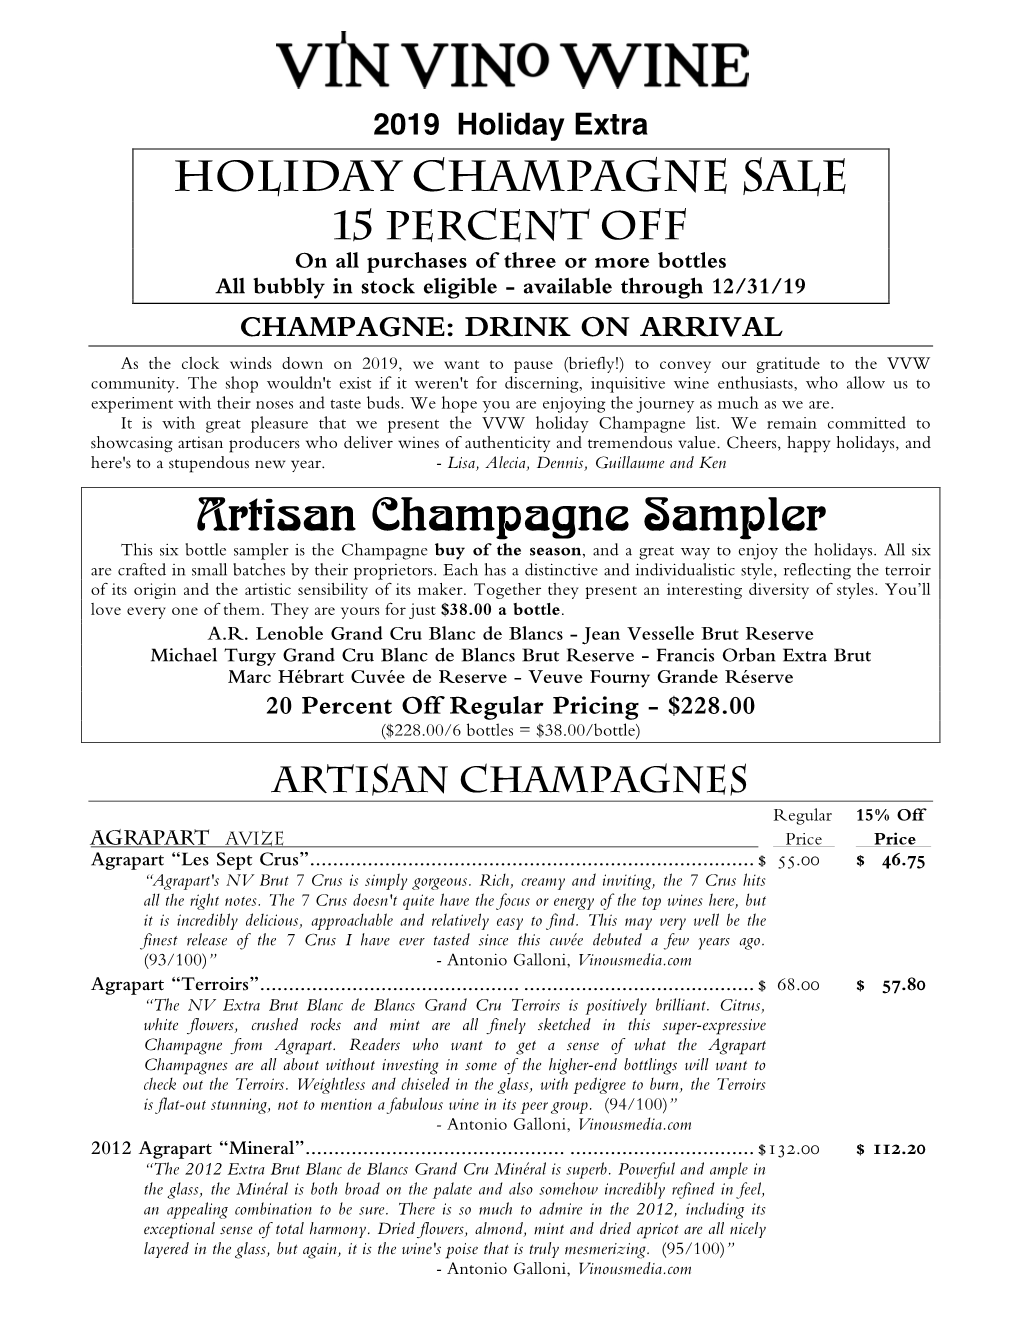 Champagne Sale 15 PERCENT OFF on All Purchases of Three Or More Bottles All Bubbly in Stock Eligible - Available Through 12/31/19